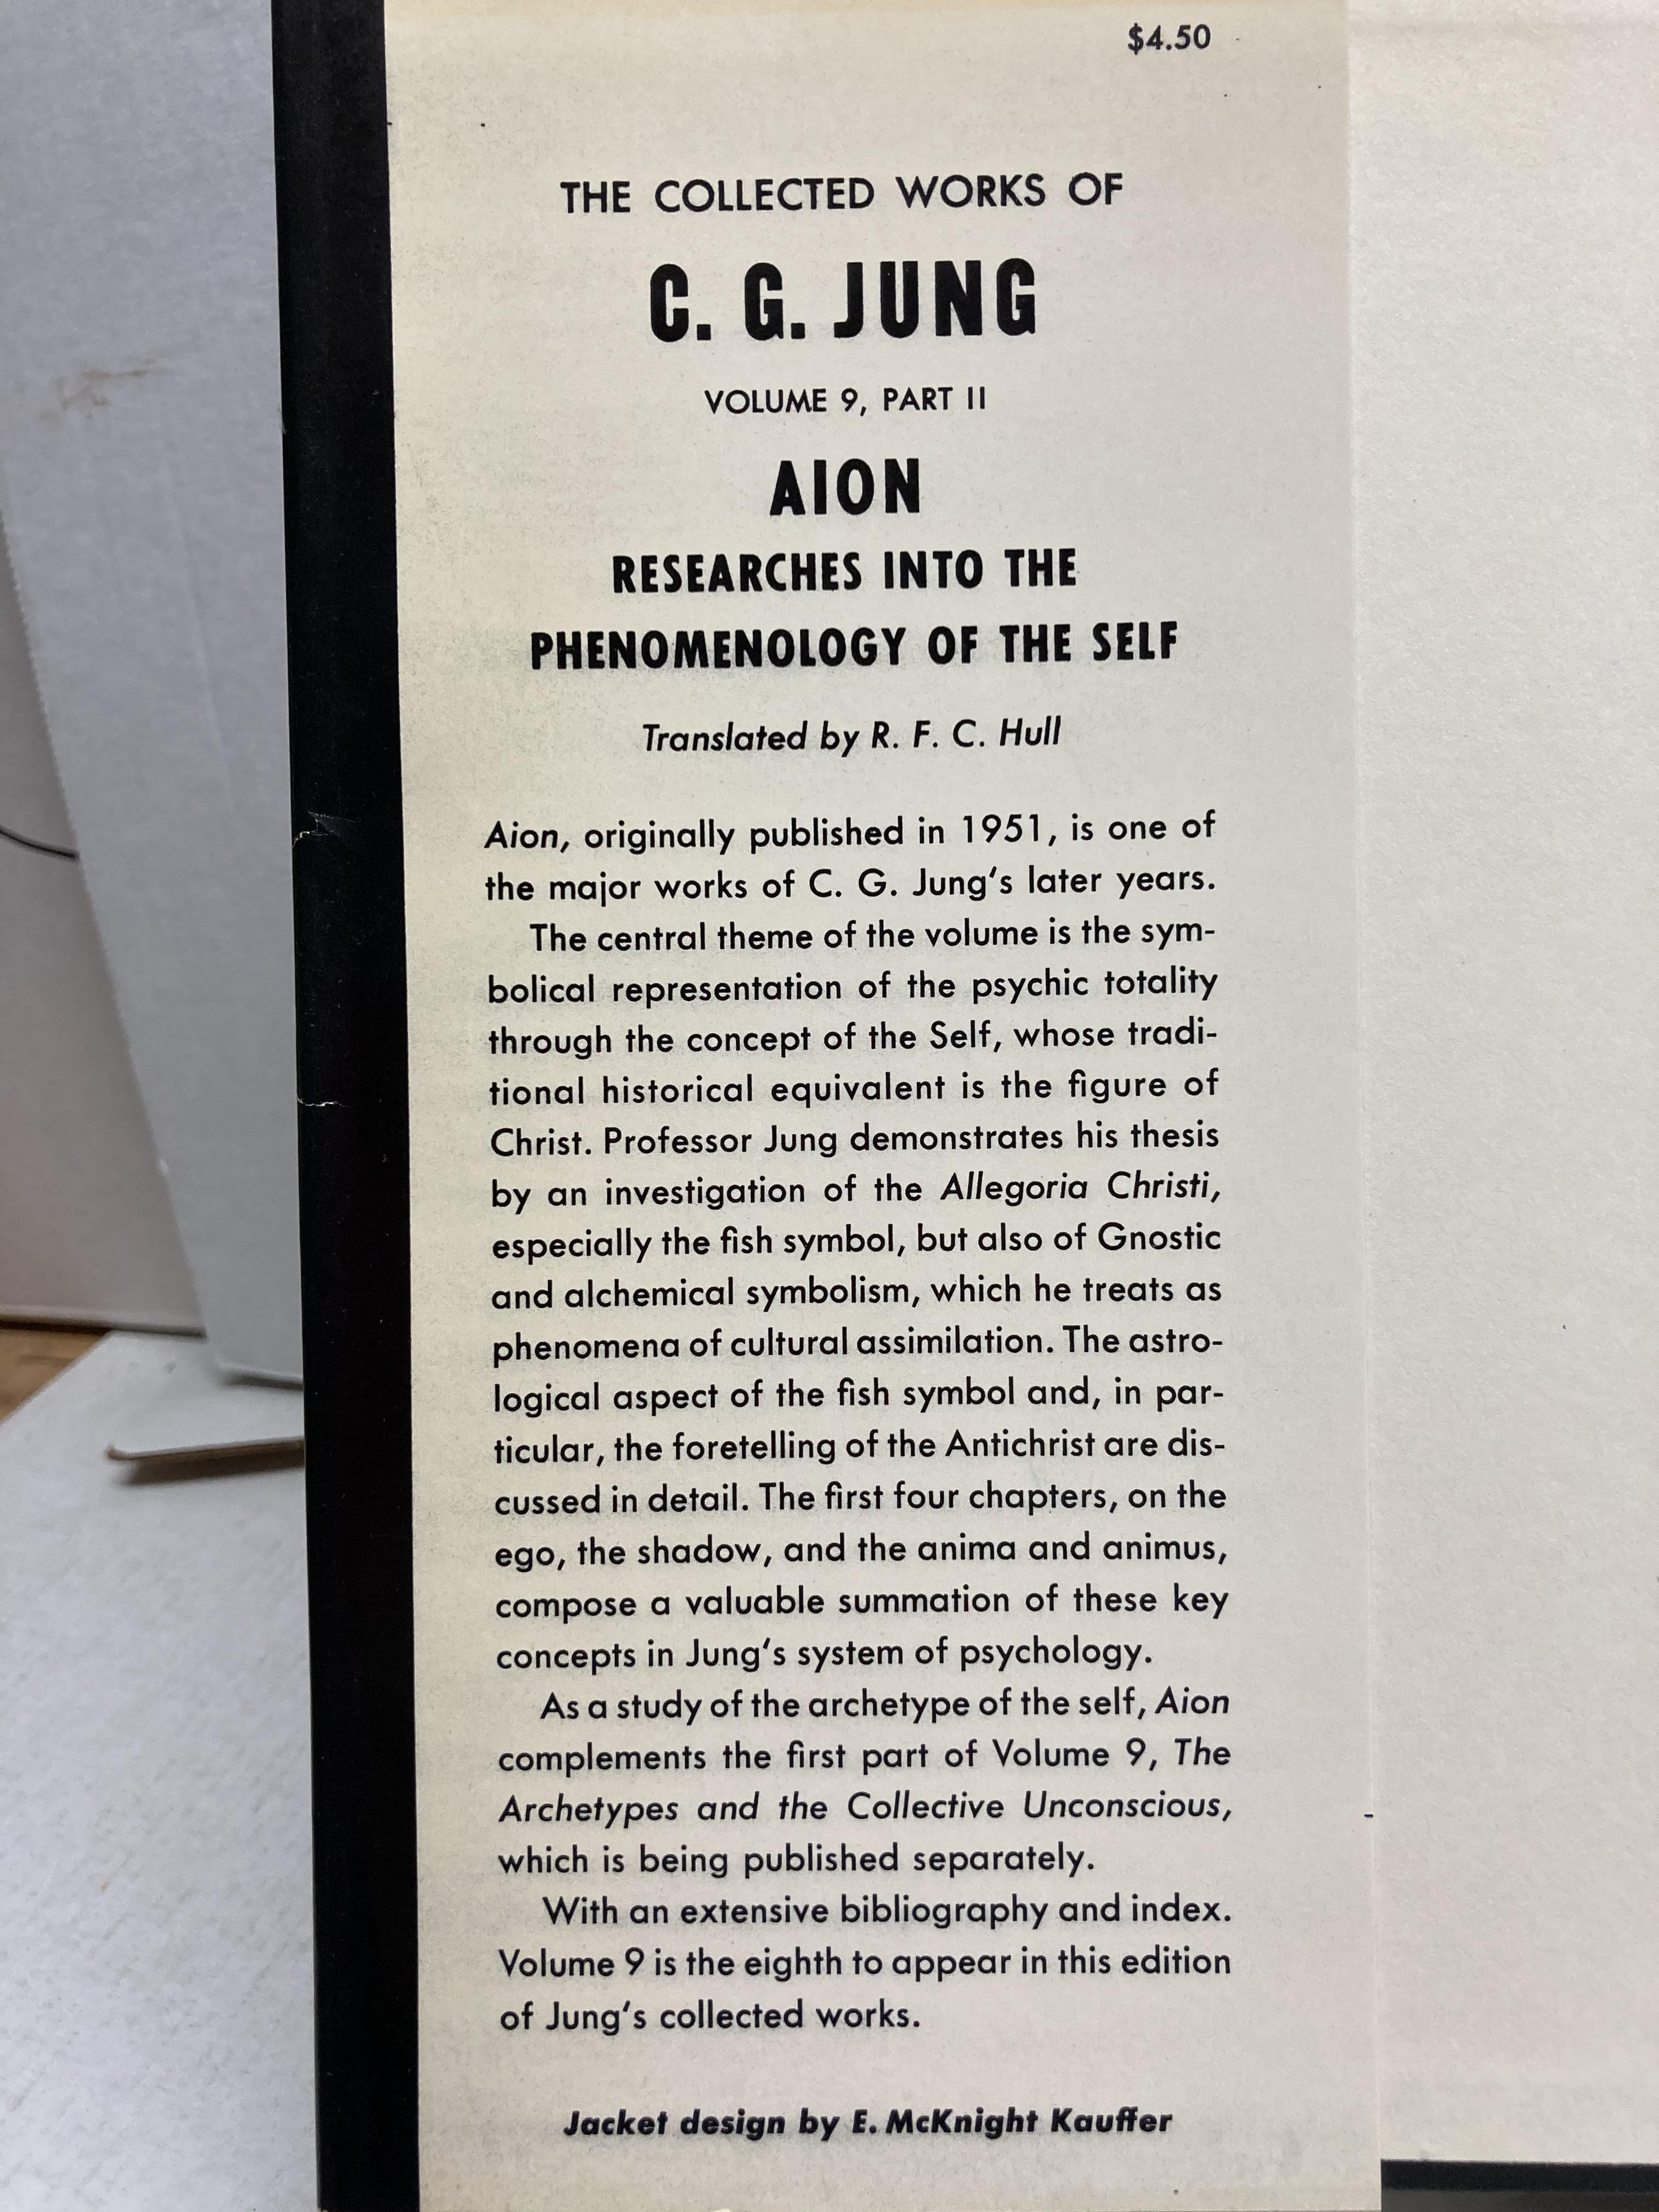 Image 3 of The Collected Works of C.G. Jung: Volume 9, Part II, AION: Researches Into the P